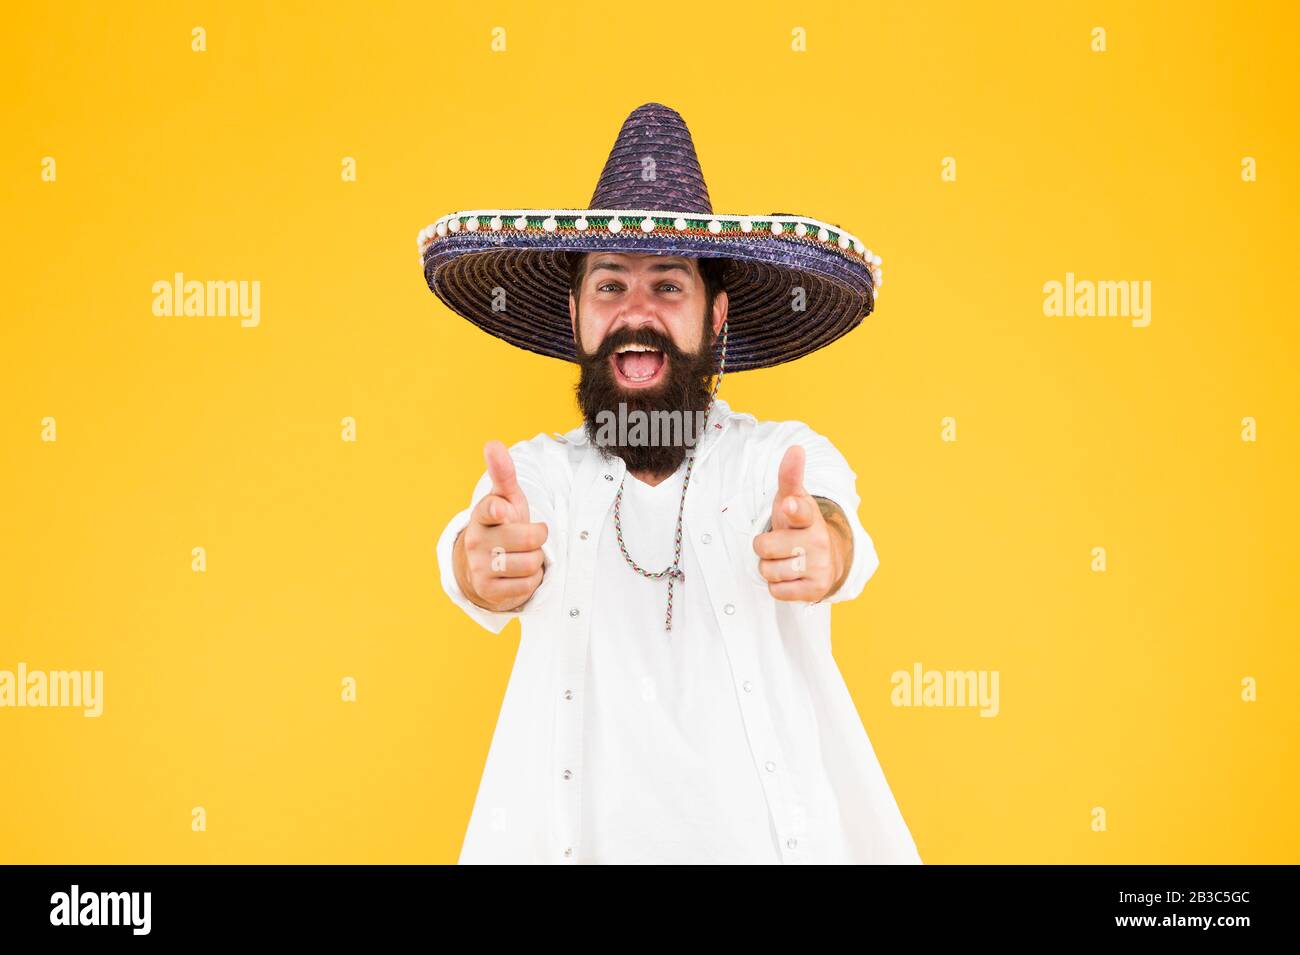 Fest and holiday. Celebrate traditions. hipster looks festive in sombrero. celebrating fiesta. happy man wear poncho. having fun on mexican party. sombrero party man. man in mexican sombrero hat. Stock Photo